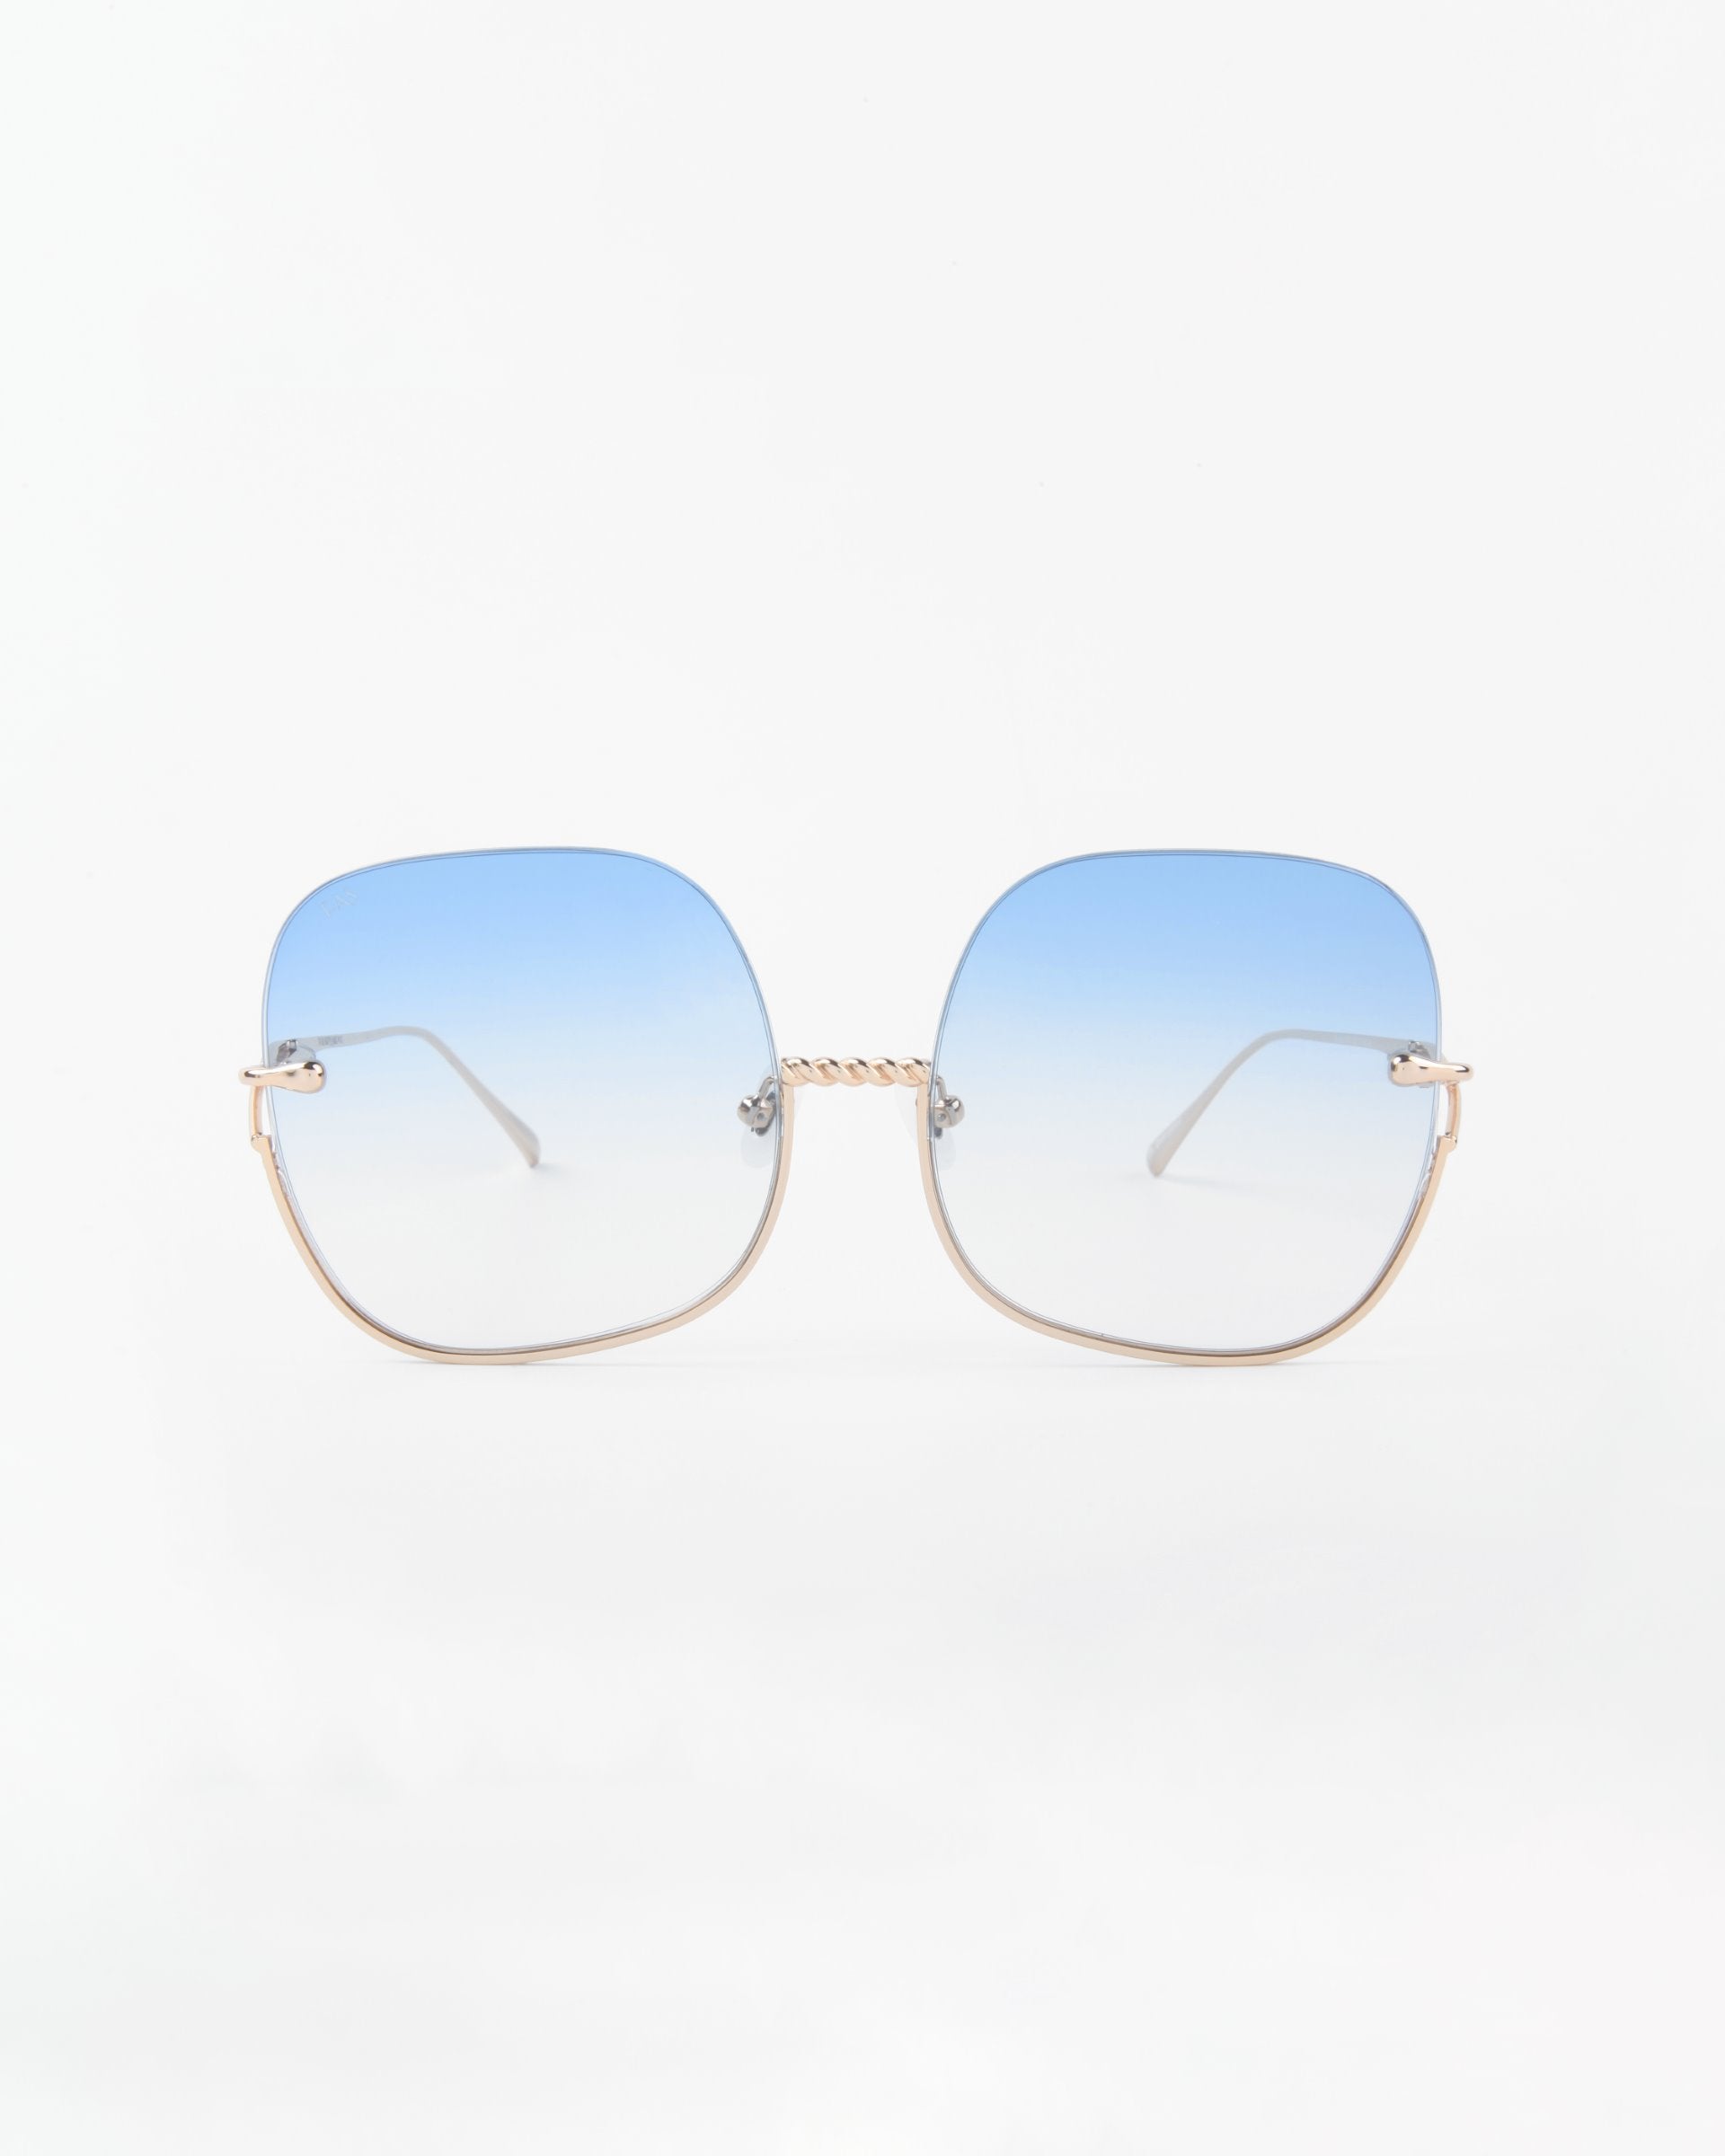 A pair of sunglasses with large, square, shatter-resistant lenses that gradient from blue at the top to clear at the bottom. They feature a handmade gold-plated frame with a delicate twisted design on the nose bridge and slim gold temples. The lenses offer UVA & UVB protection. The background is plain white. These are the Duchess by For Art's Sake®.